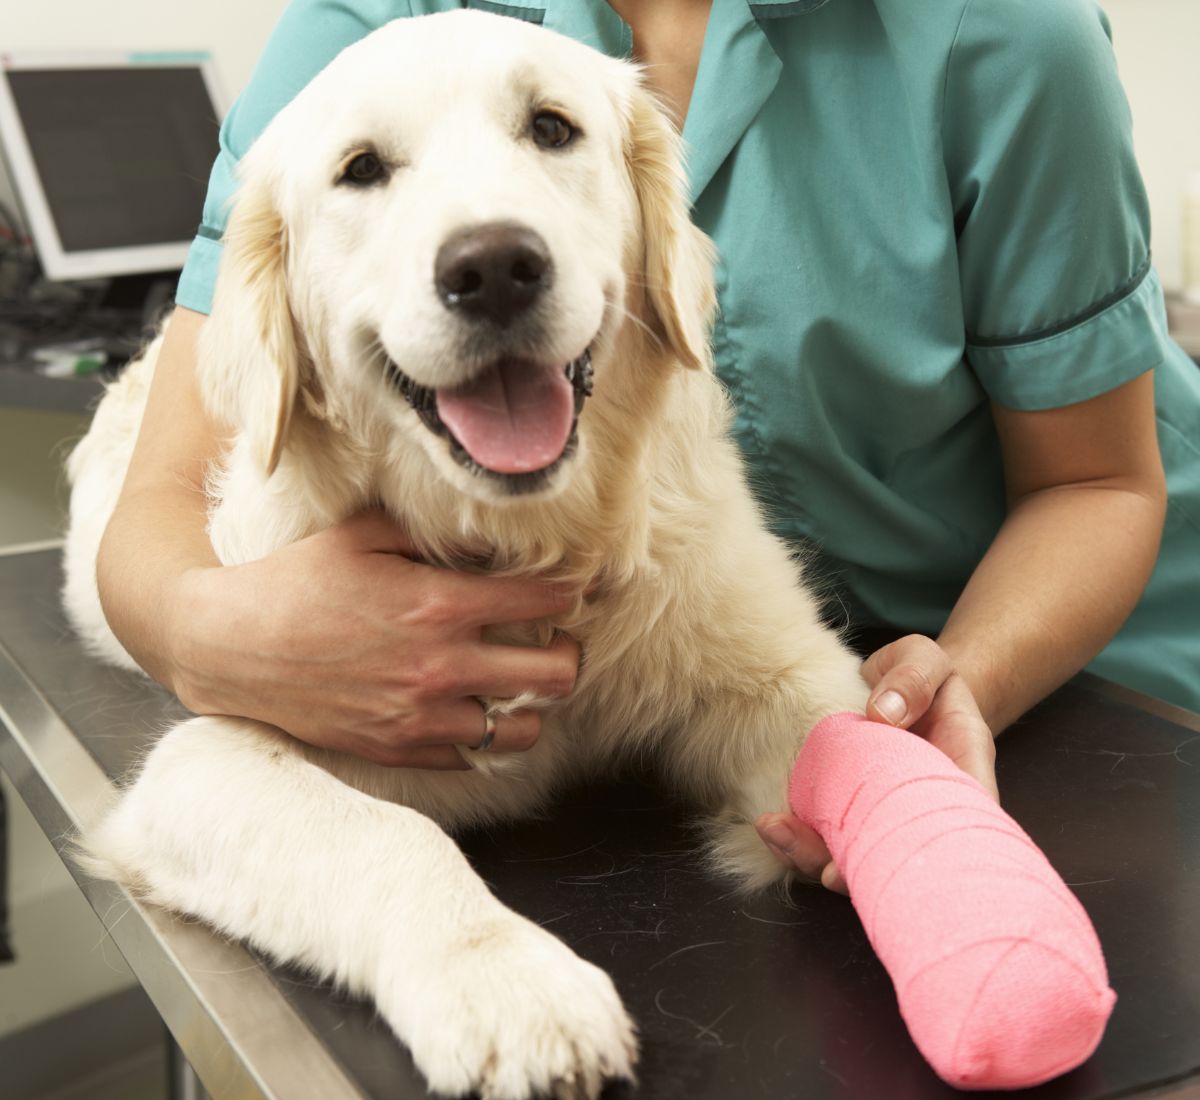 Dog with a cast on its arm